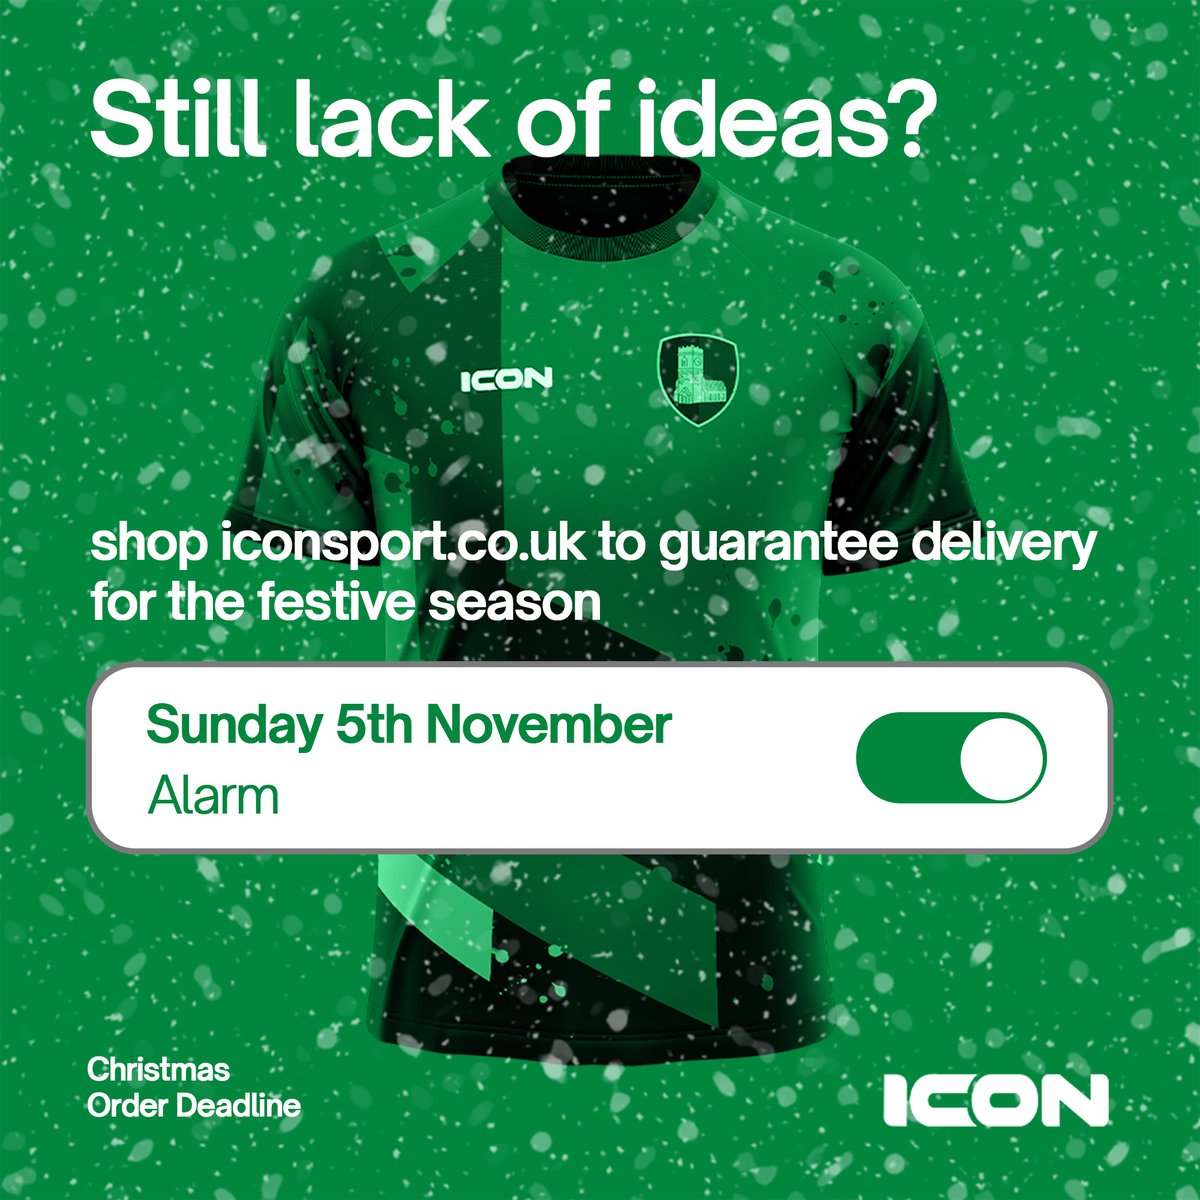 Still out of ideas for Christmas presents❓ LESS THAN 48 HOURS until our Christmas Order Deadline! Order your #teamwear now to be fully ready for the upcoming occasion. ❓Got a question? DM us or email: sales@iconsports.co.uk #iconsports #iconsportsuk #strengthinunity